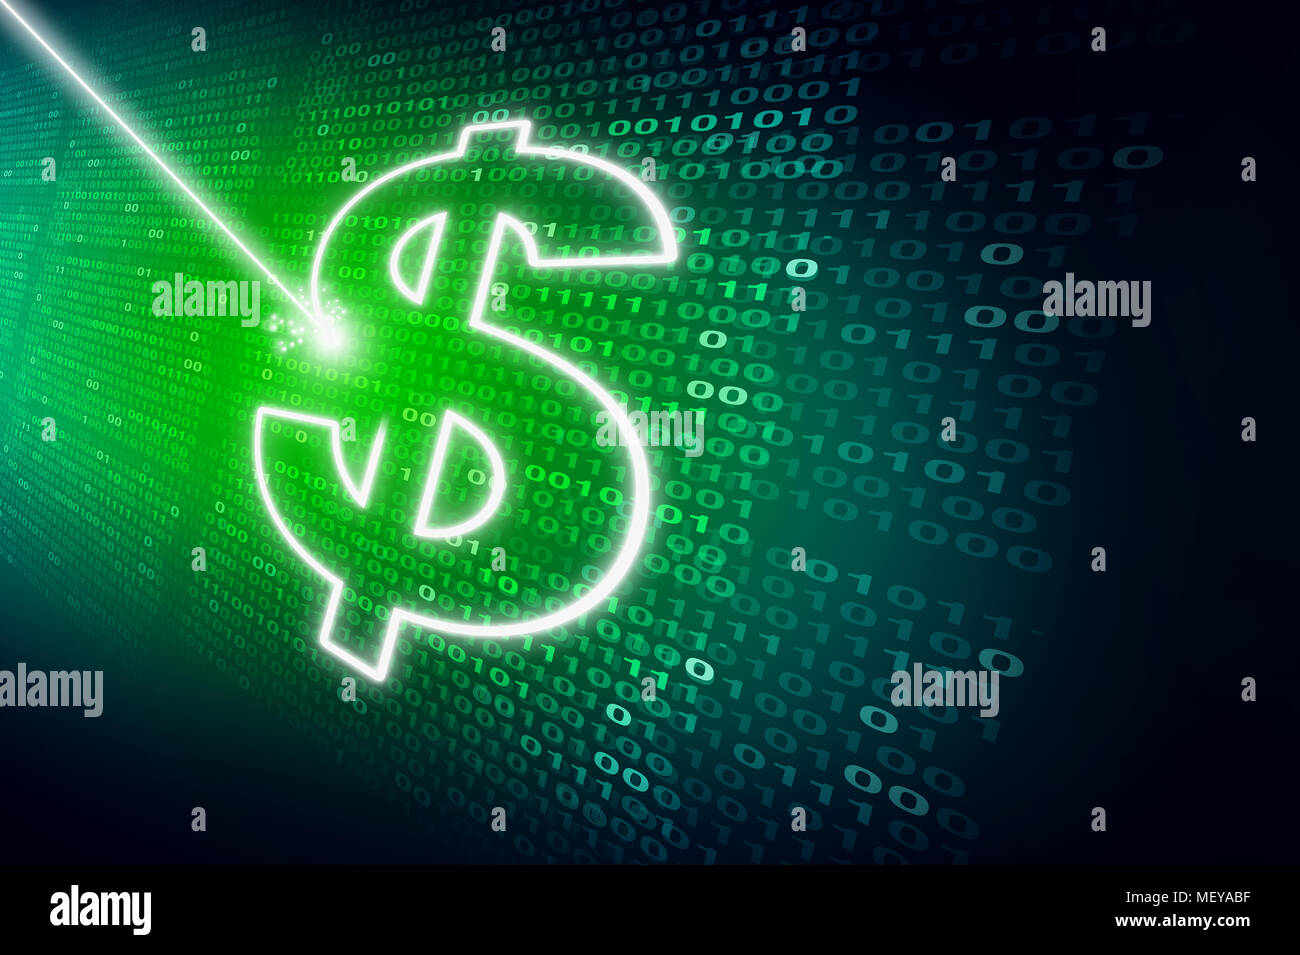 Financial data abstract technology background as a laser writing a dollar sign on digital code as an internet banking or investing finance. Stock Photo